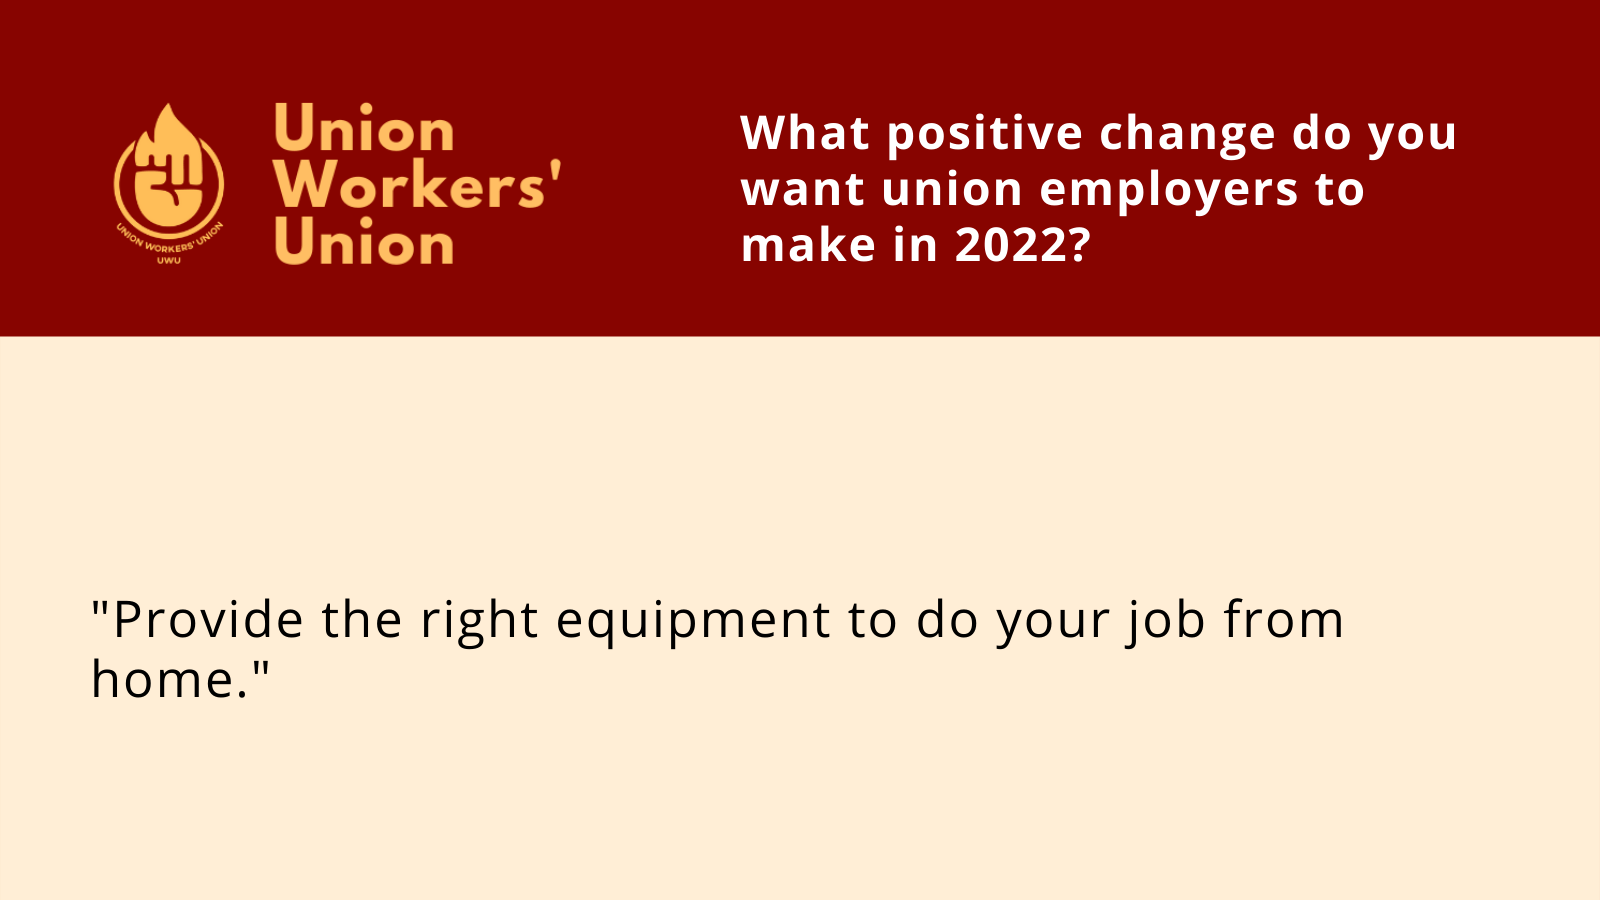 UWU logo next to the question, what positive change do you want union employers to make in 2022? Member response: Provide the right equipment to do your job from home.